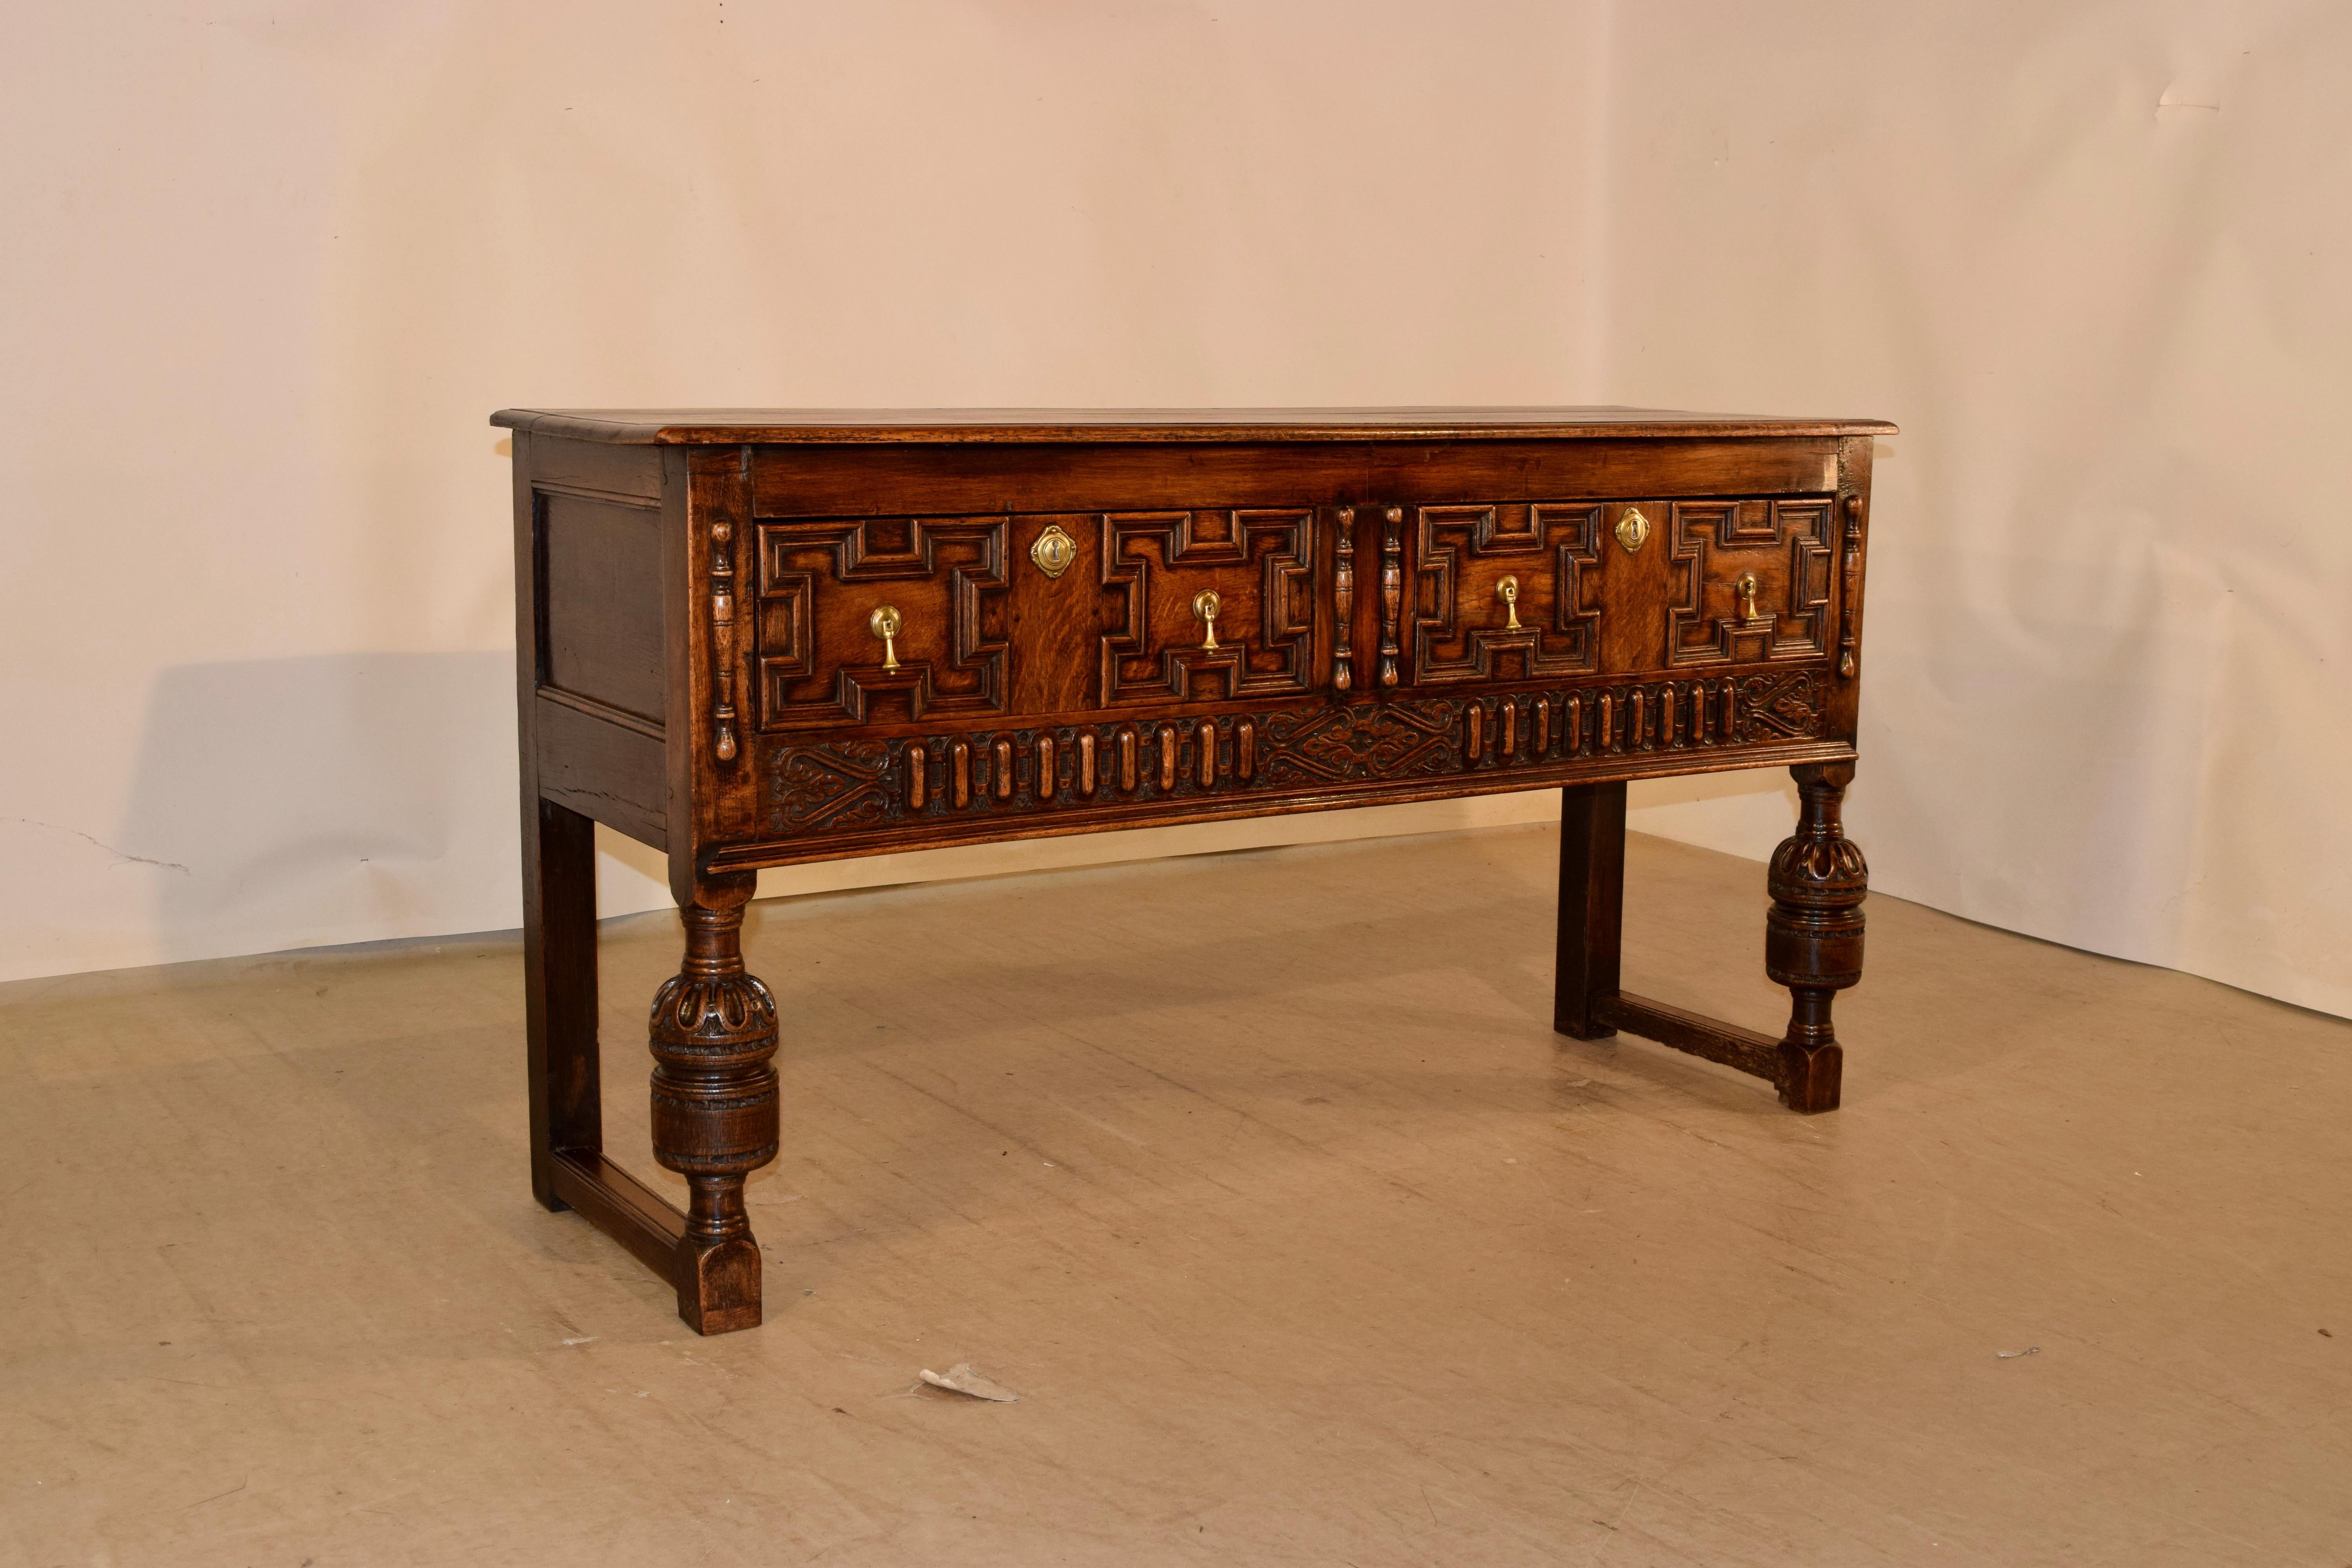 19th century oak sideboard from England with a beveled edge around the top, following down to paneled sides and two drawers in the front with raised geometric panels, flanked by hand-turned applied moldings. The apron is also wonderfully carved and